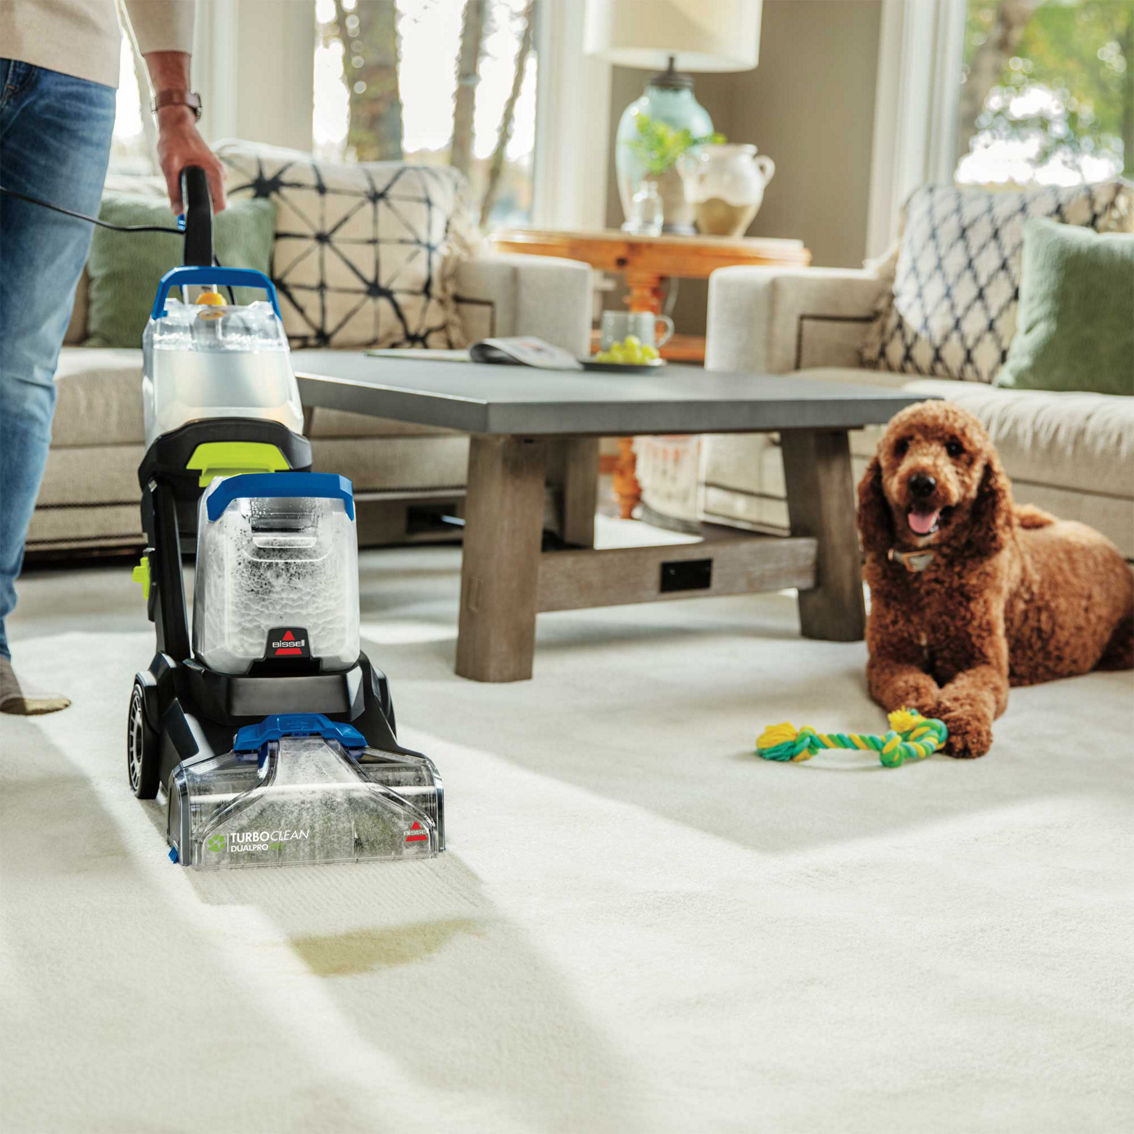 Bissell Turboclean Dualpro Pet Carpet Cleaner, Carpet Cleaners, Furniture  & Appliances